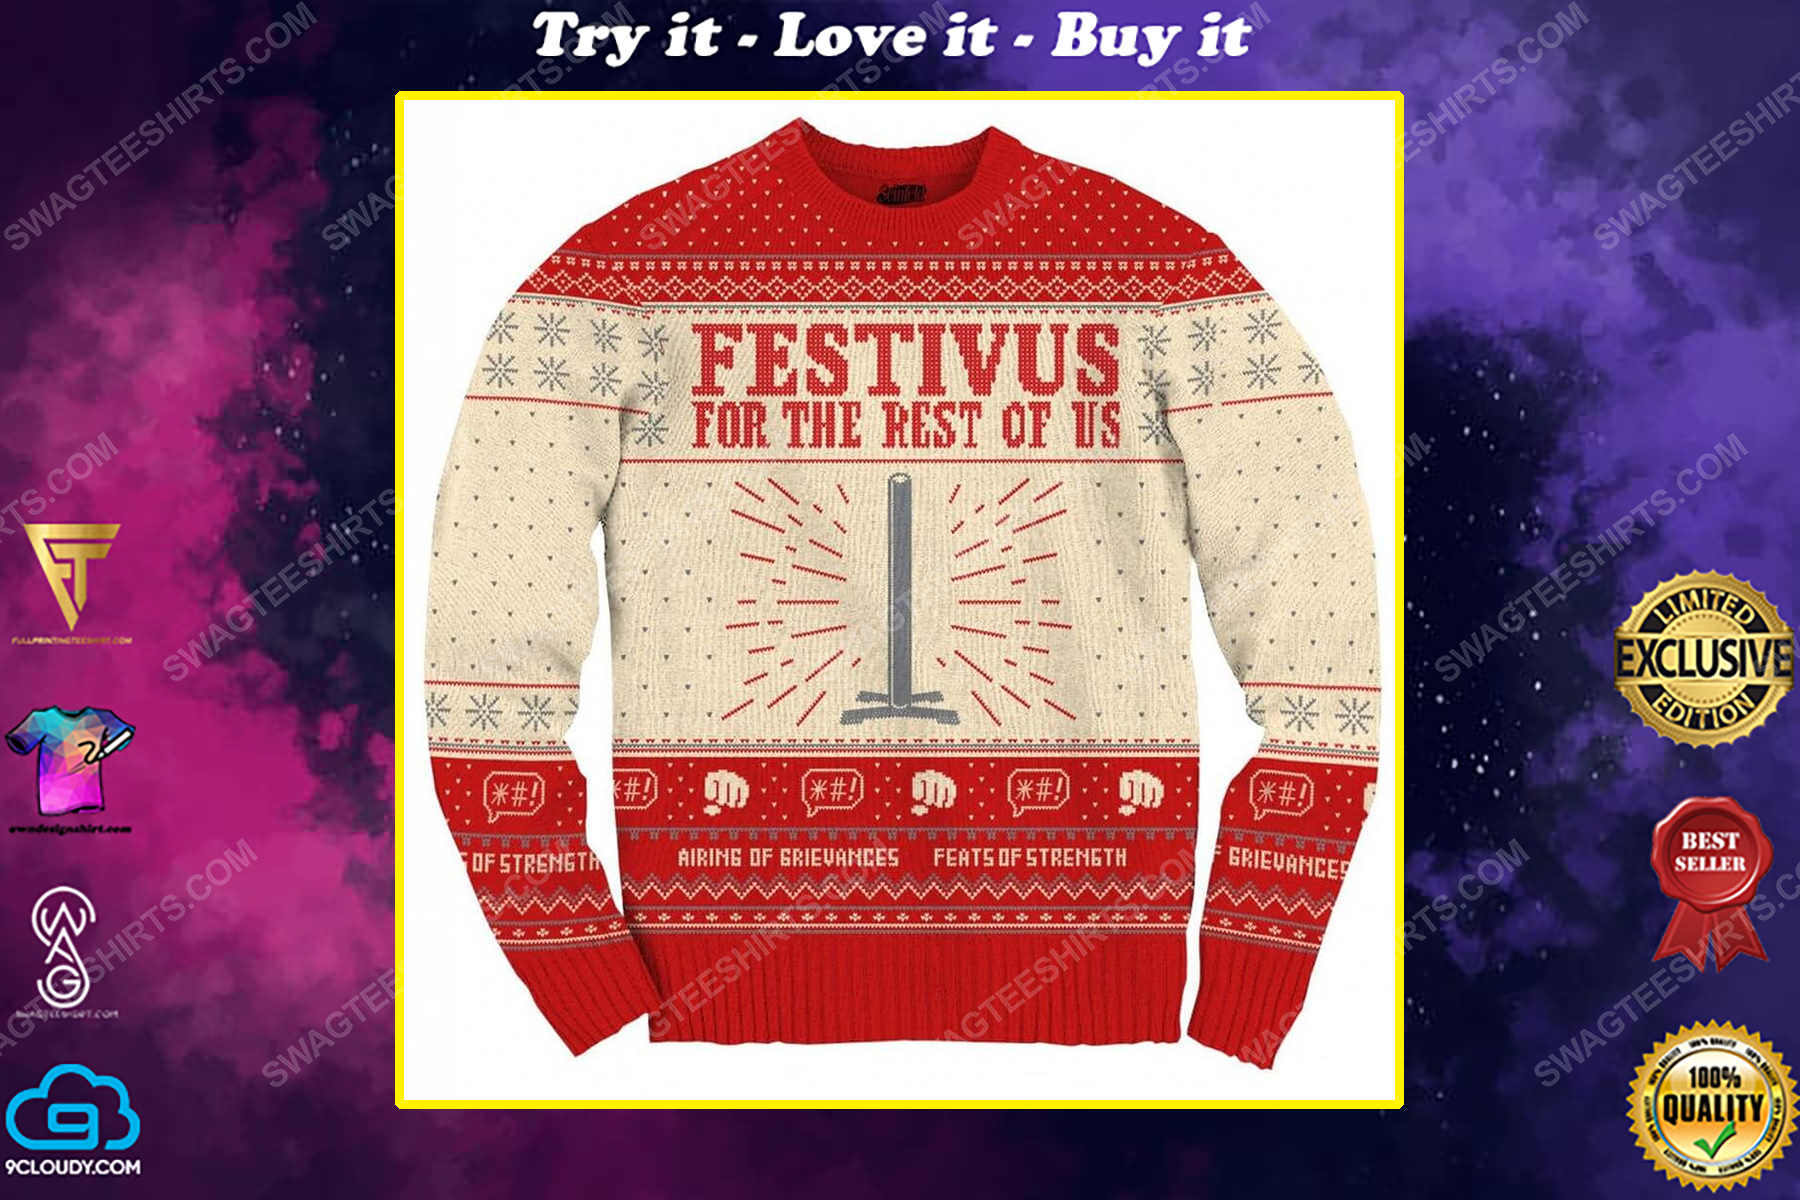 Seinfeld festivus for the rest of us pole full print ugly christmas sweater